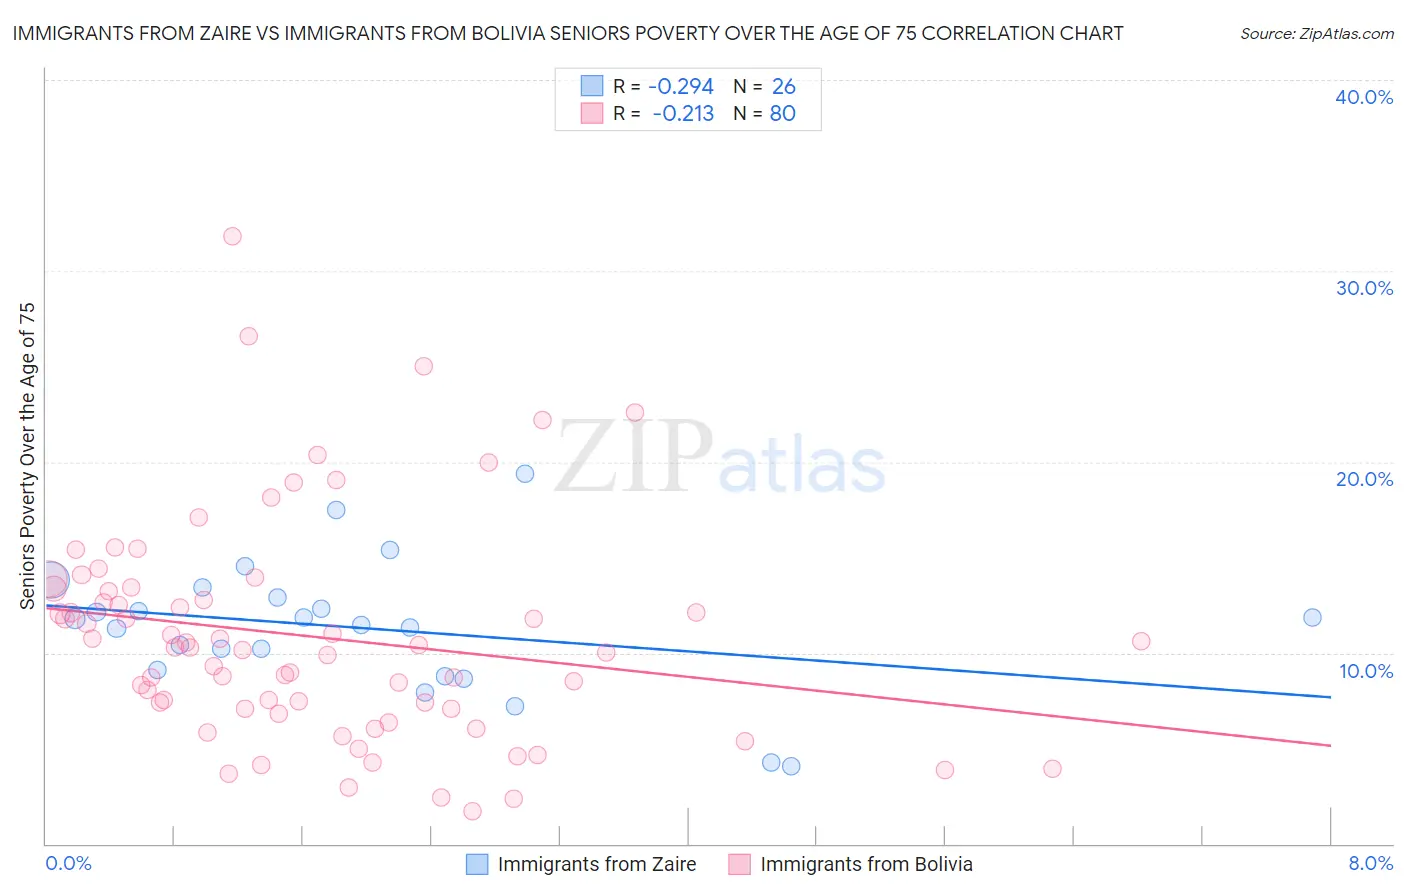 Immigrants from Zaire vs Immigrants from Bolivia Seniors Poverty Over the Age of 75